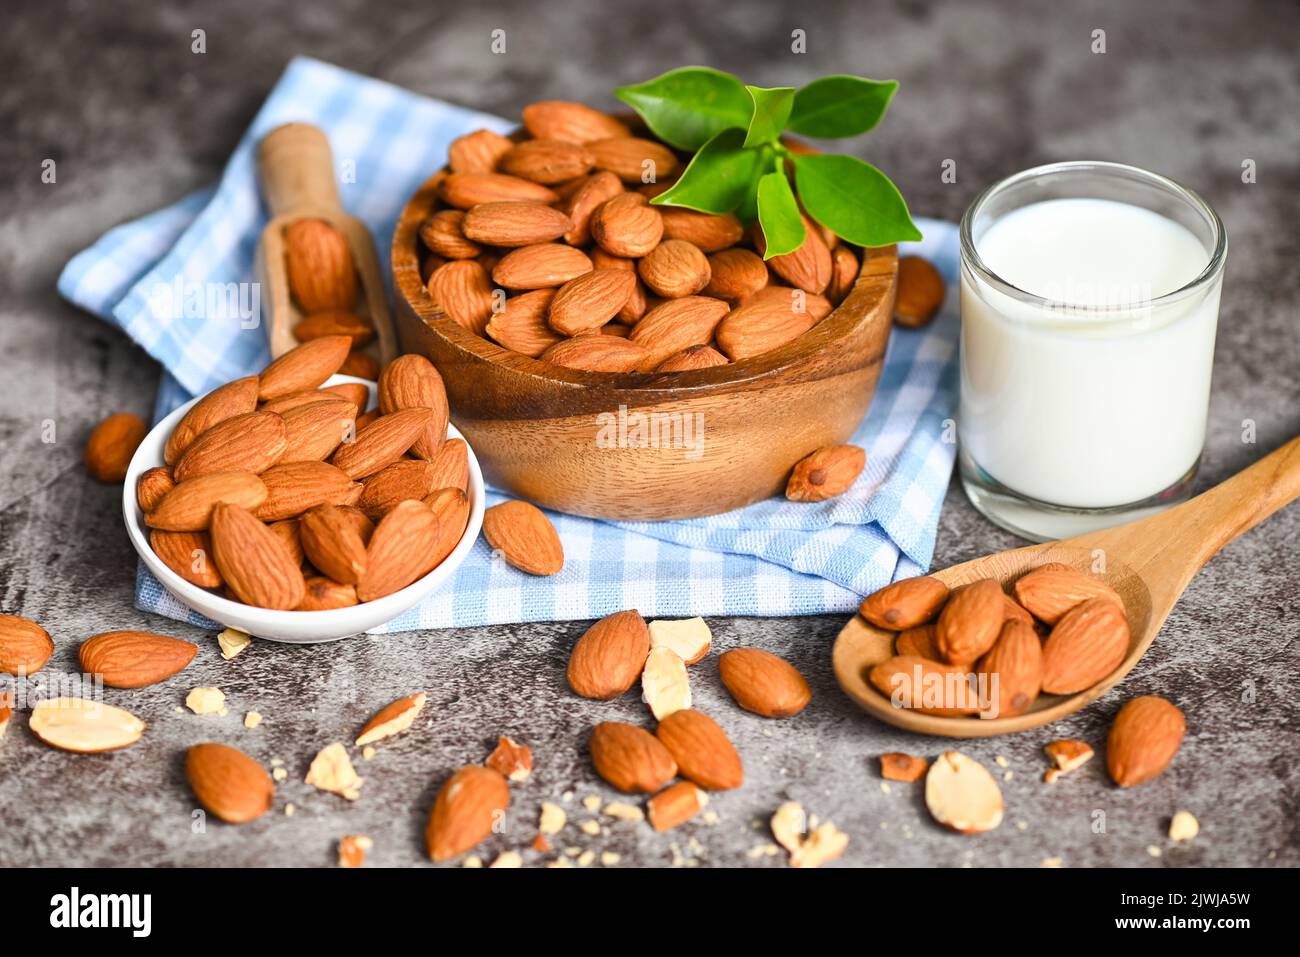 Almond milk and Almonds nuts on bowl background, Delicious sweet almonds on the table, roasted almond nut for healthy food and snack Stock Photo